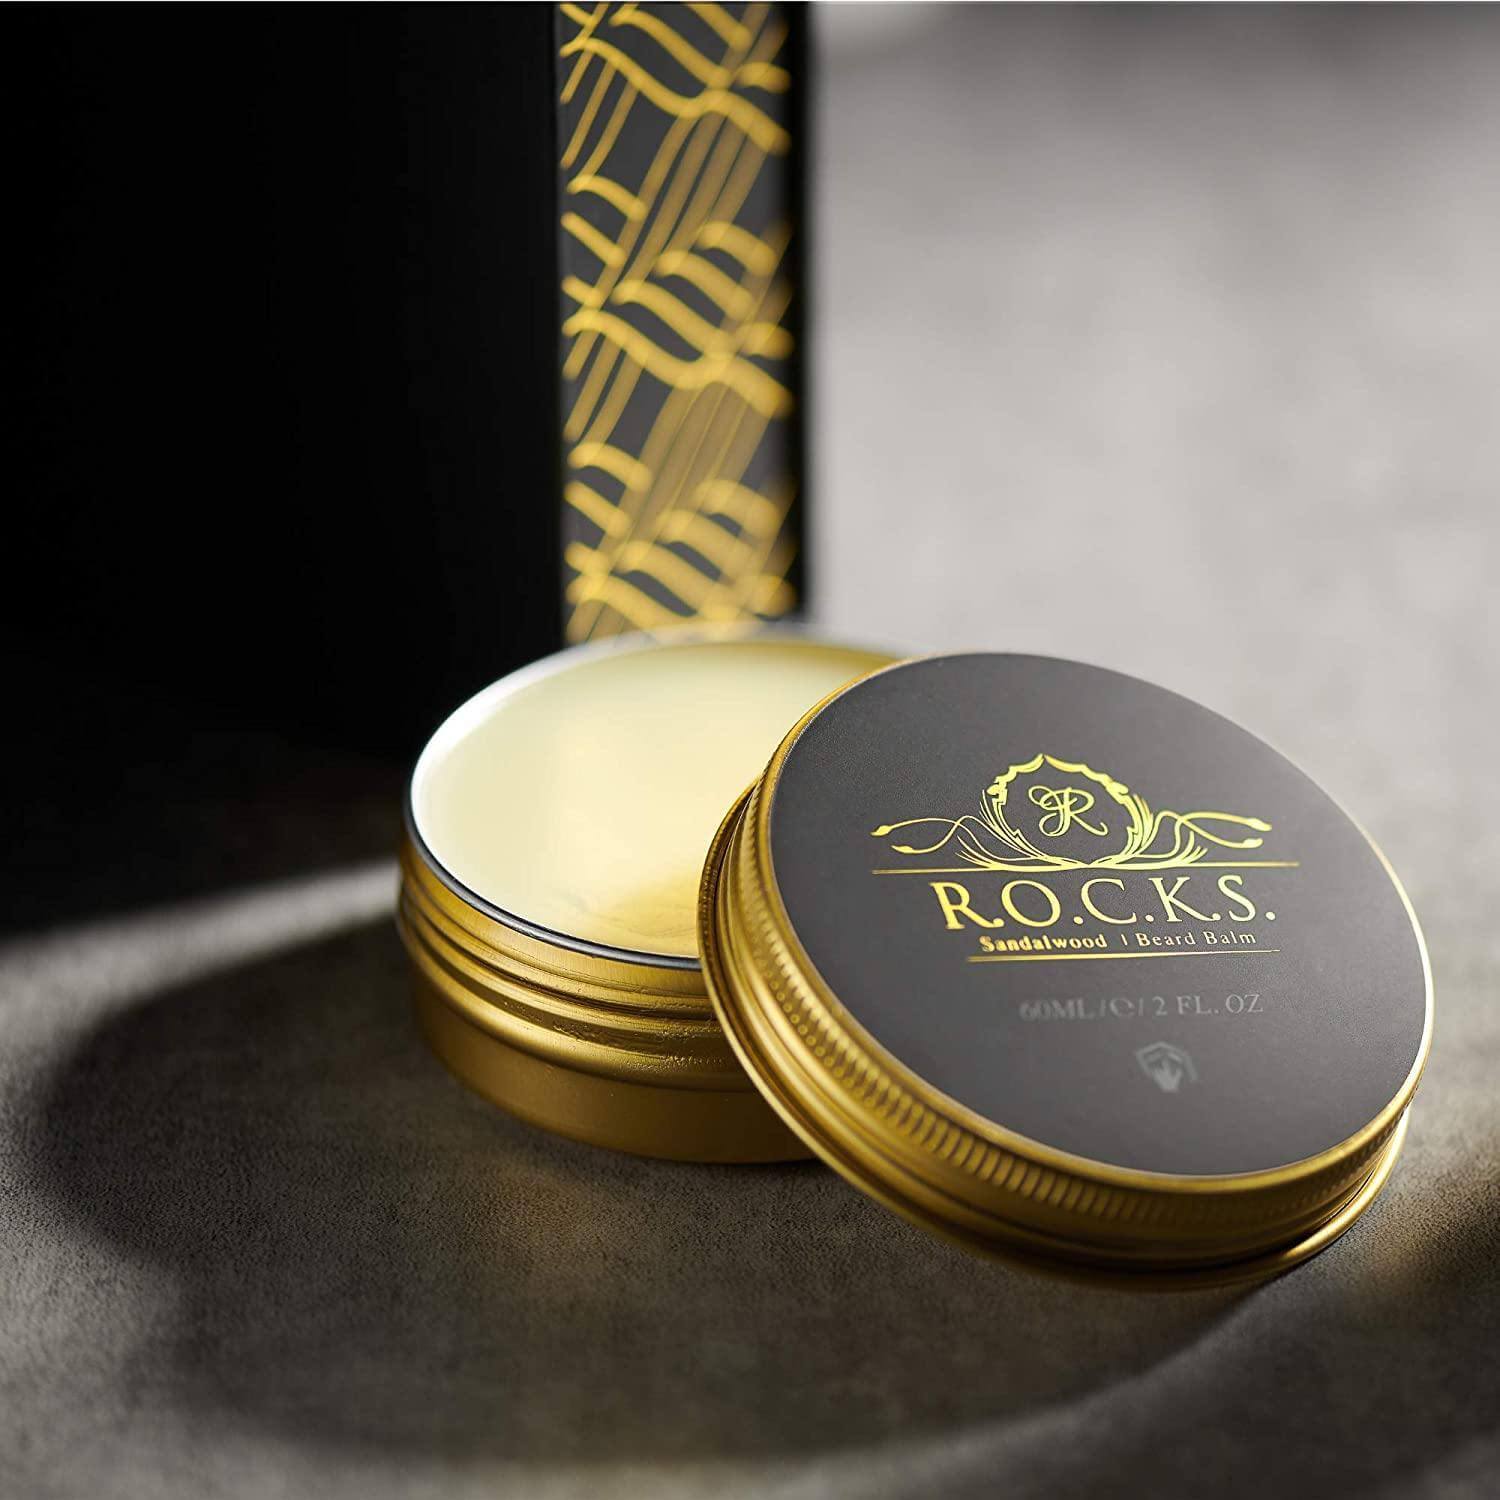 The Gentleman's Essentials - Rocks x Grooming Kit by R.O.C.K.S. Whiskey Chilling Stones